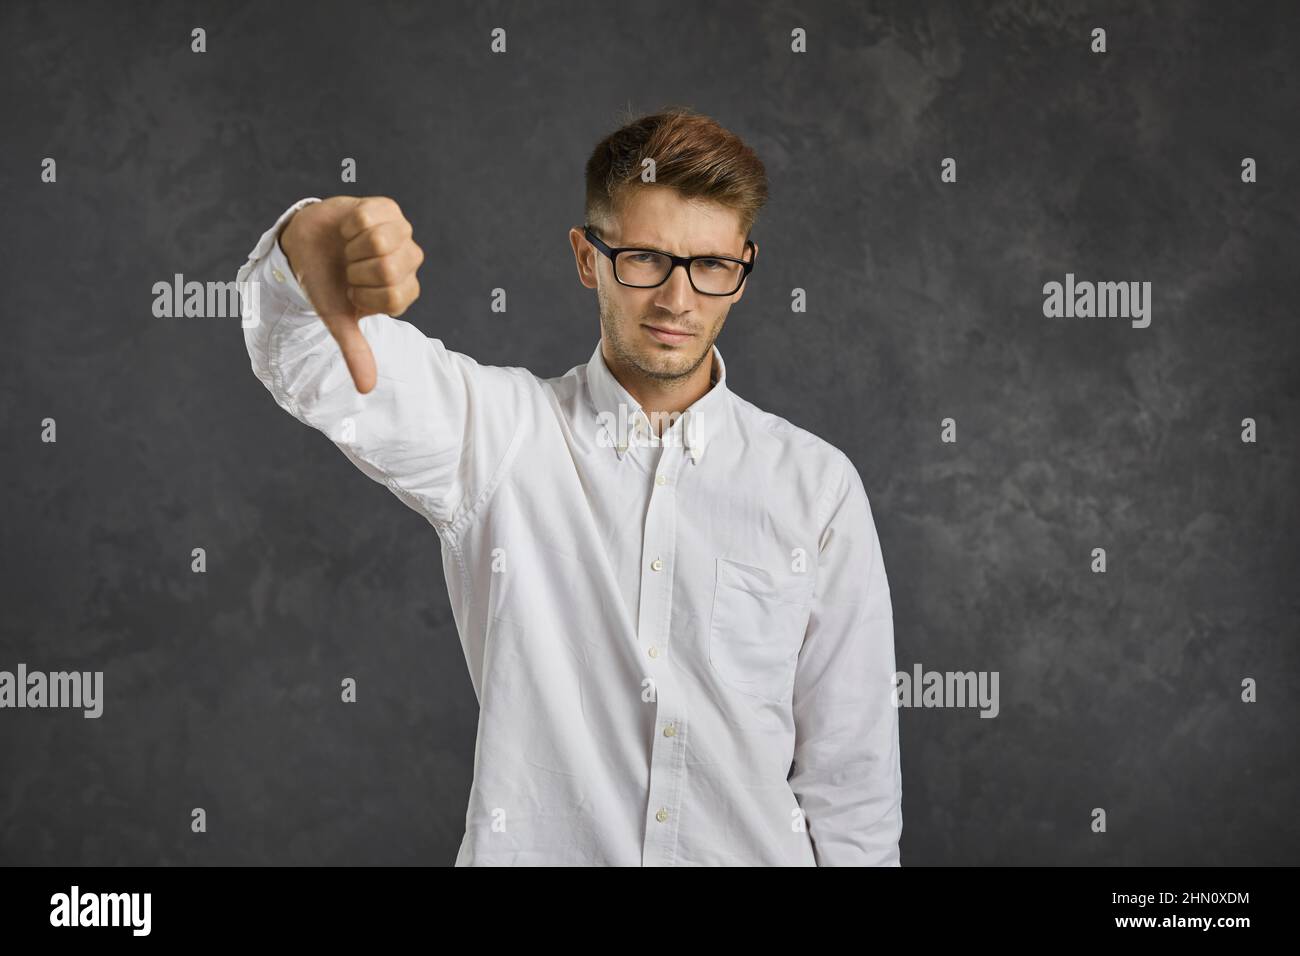 Dissatisfied and frustrated young man showing thumb down standing on gray background. Stock Photo